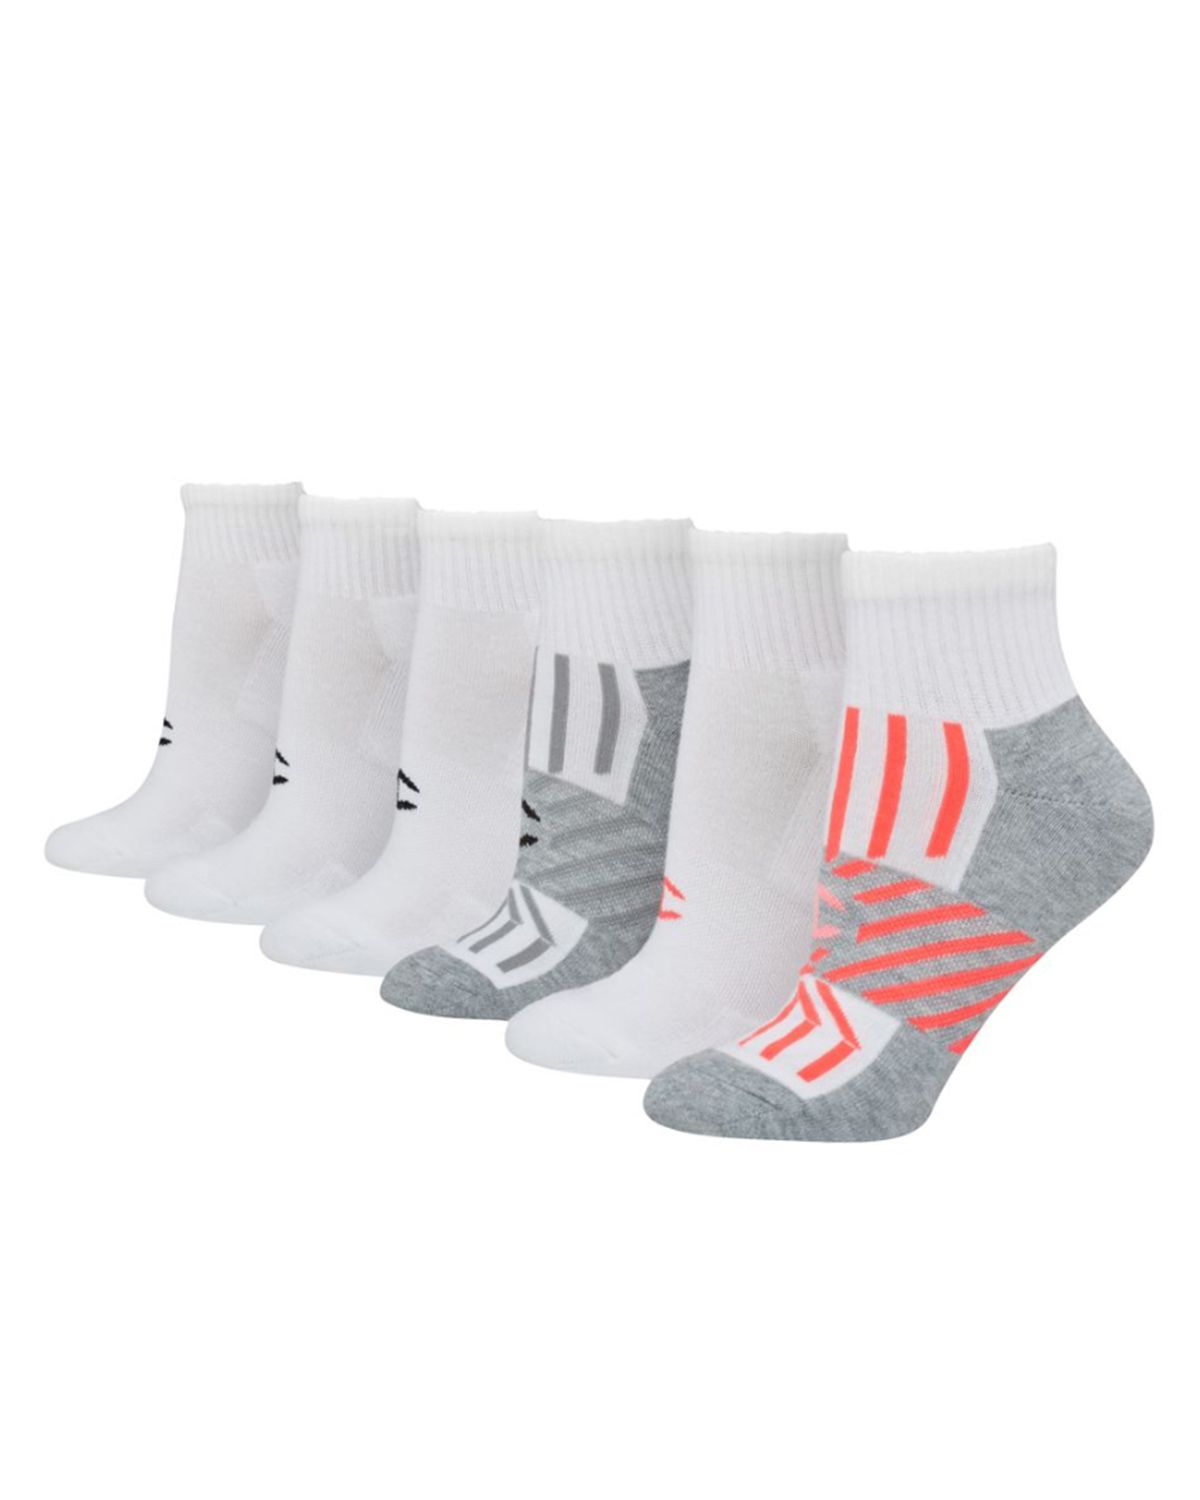 Champion CH308 Women's Performance Ankle Socks, 6-Pack